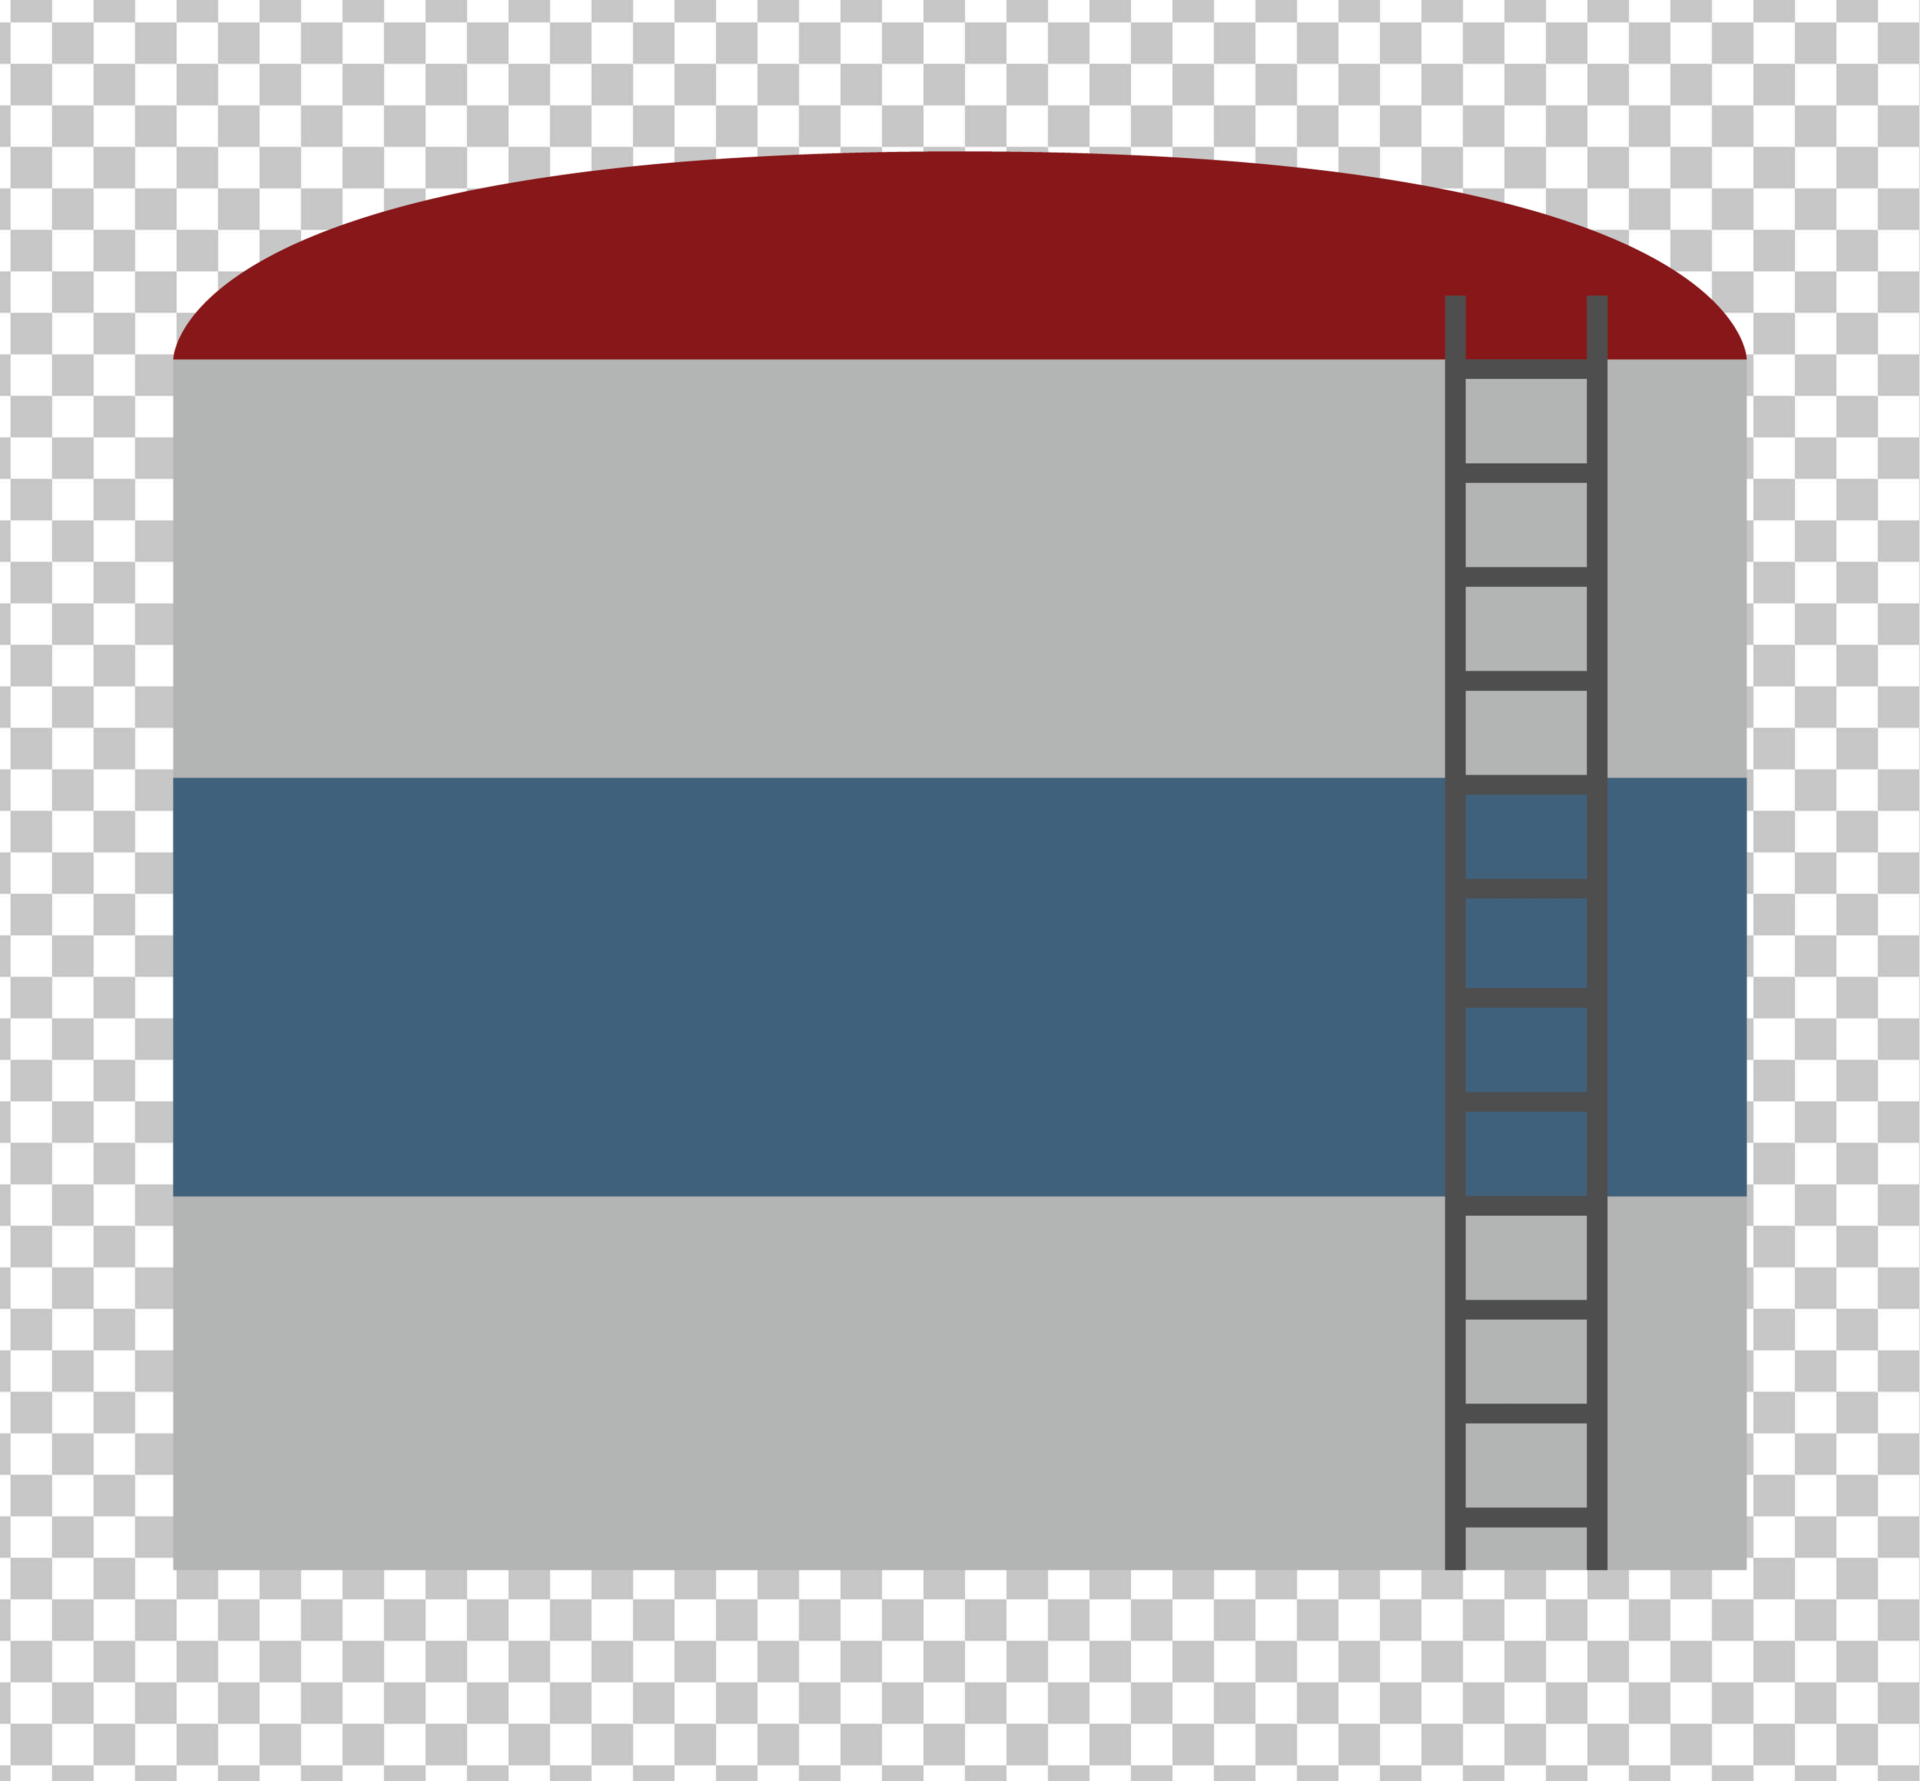 Food Storage Tank with Ladder PNG Image